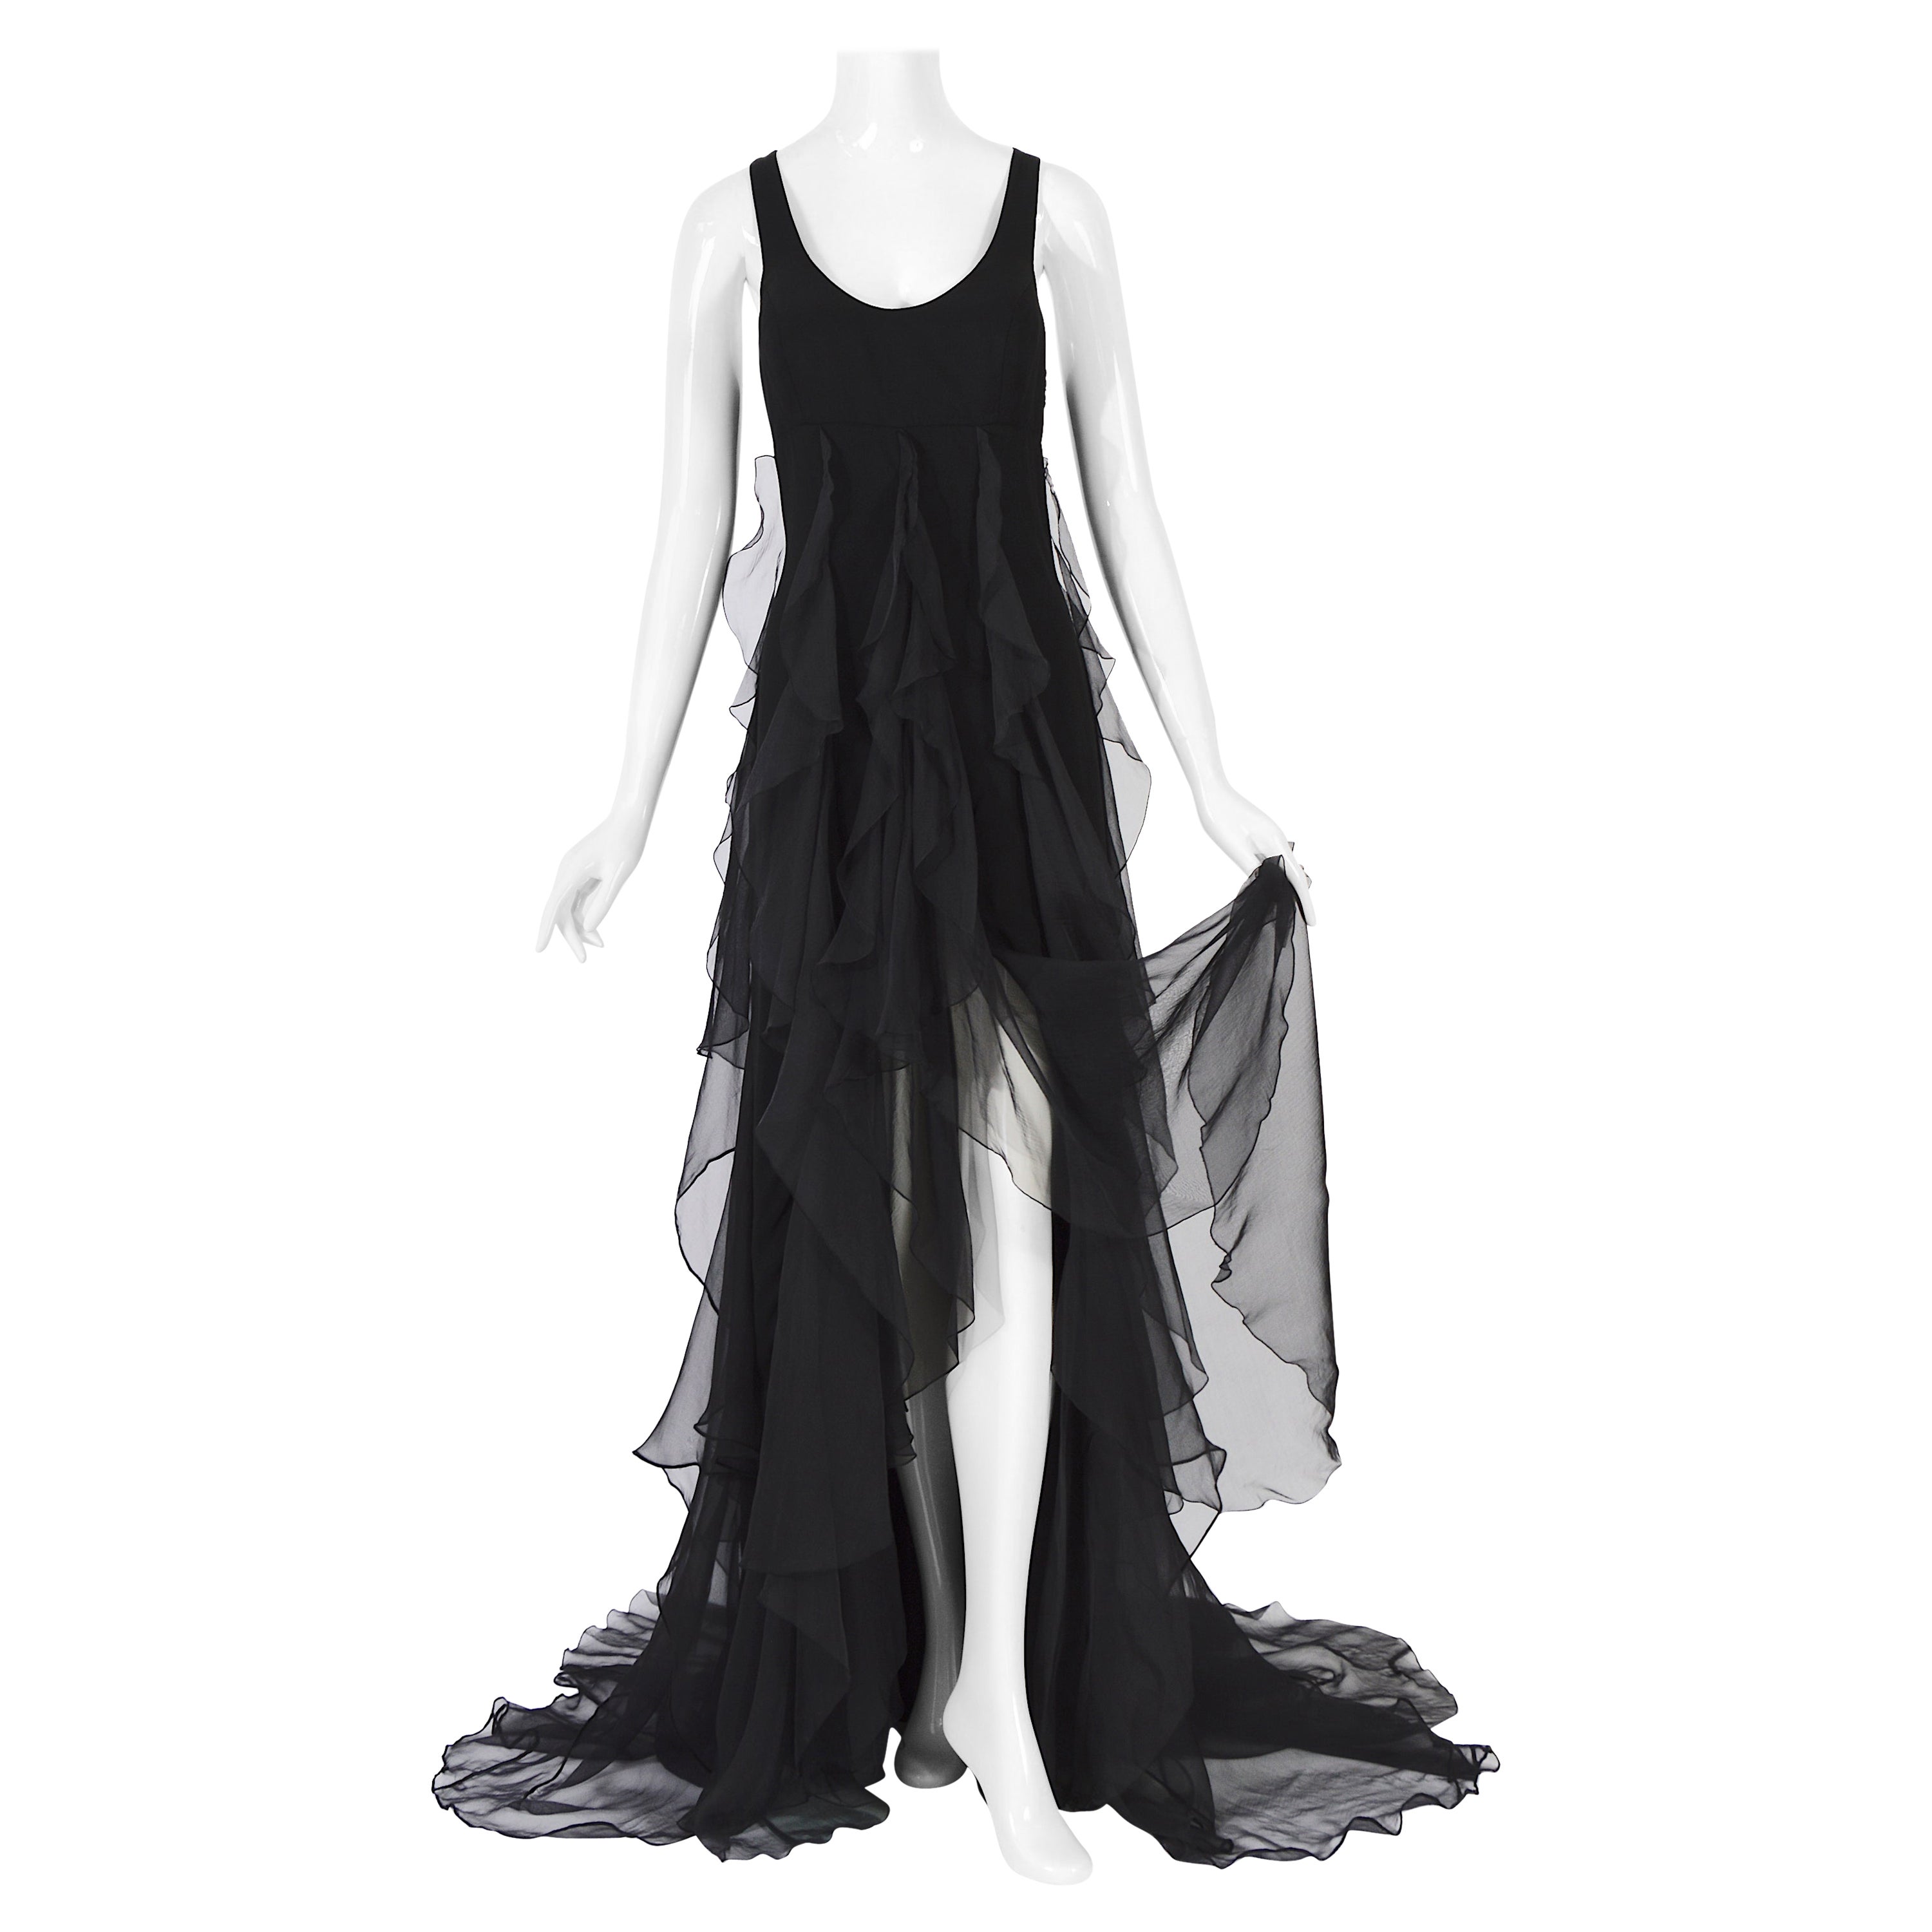 Christian Dior by Gianfranco Ferre S/S 1994 vintage black silk evening dress For Sale